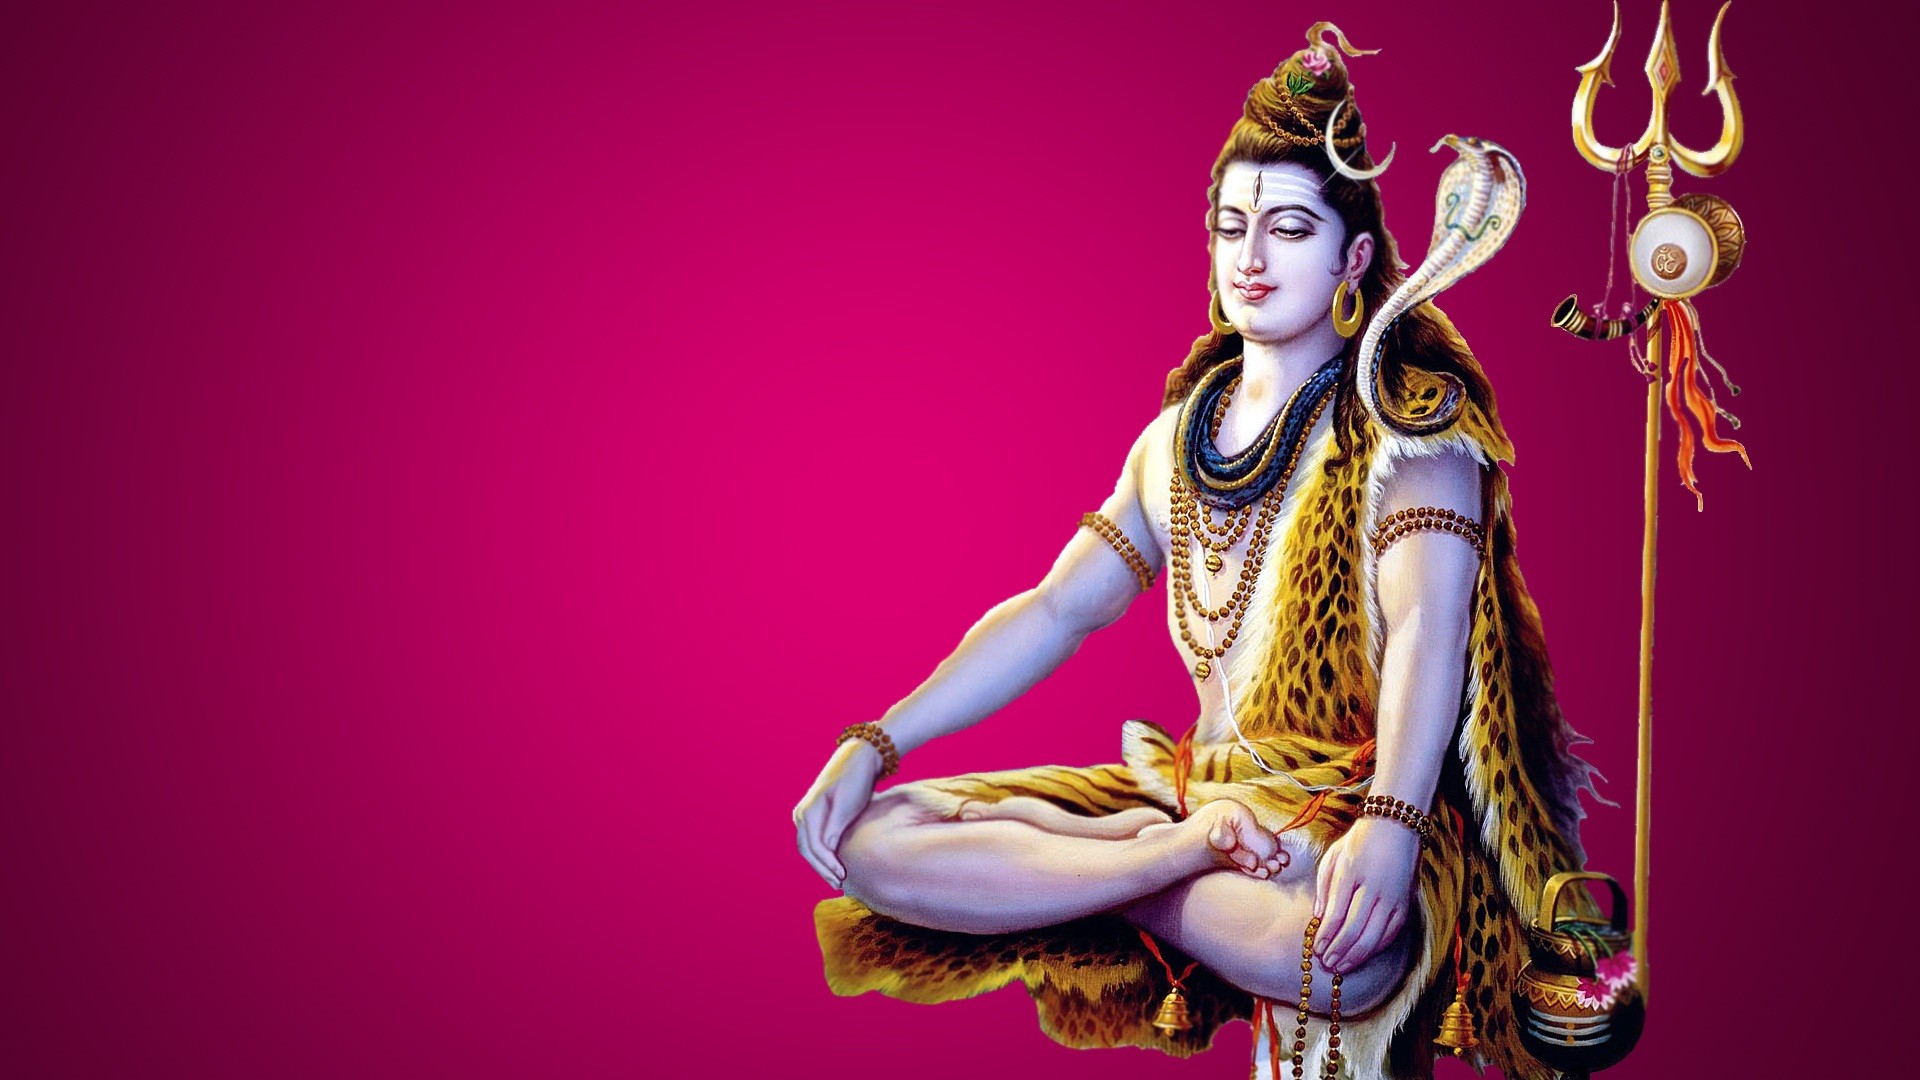 1920x1080 Lord Shiva Wallpapers HD with High Definition Wallpaper Resolution